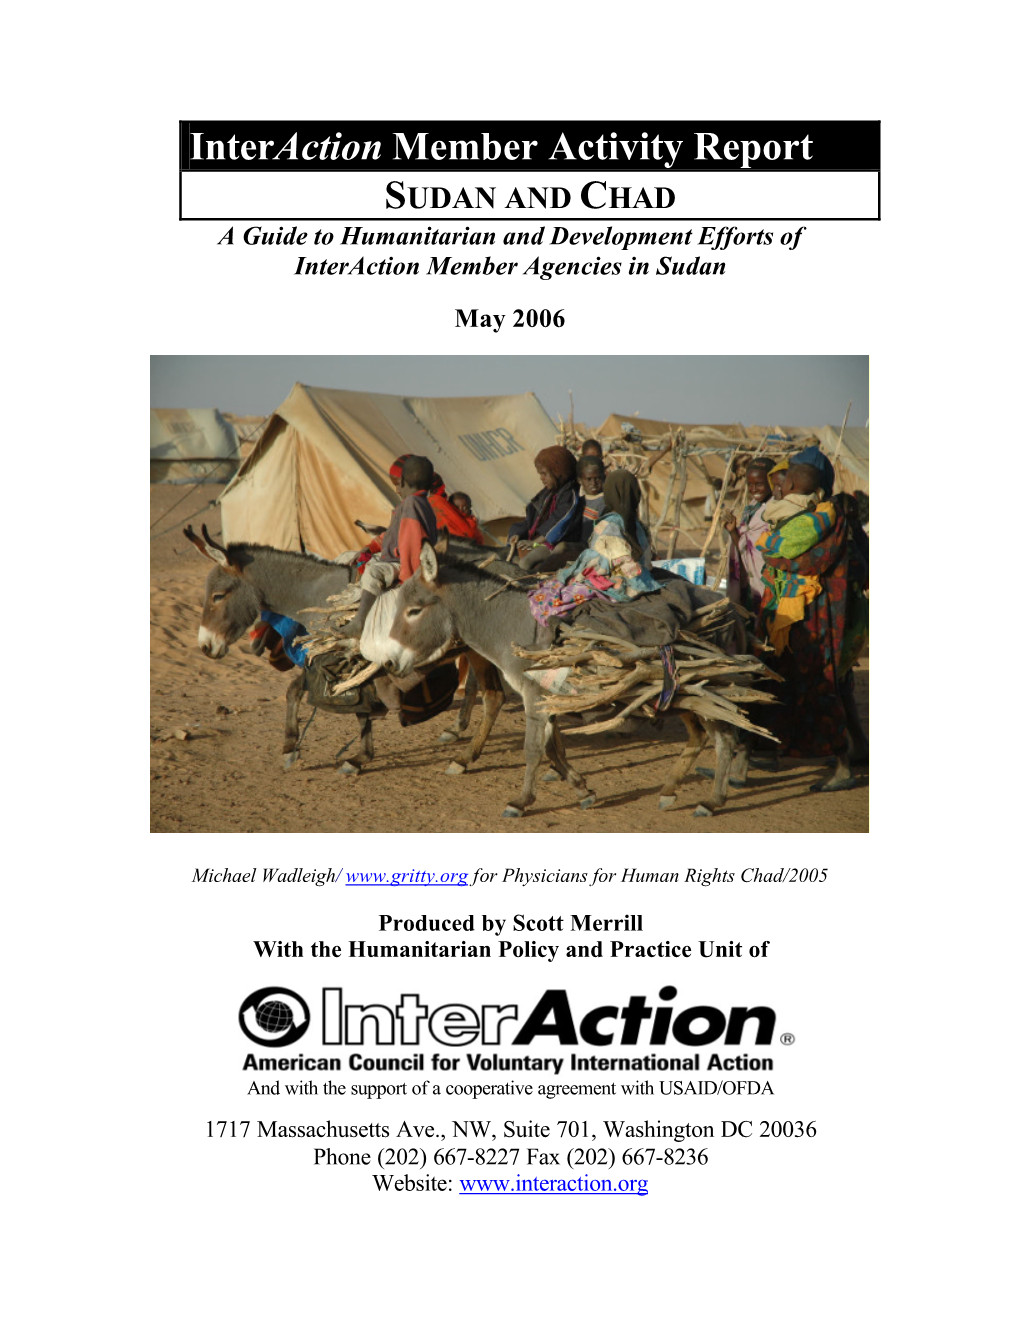 Interaction Member Activity Report SUDAN and CHAD a Guide to Humanitarian and Development Efforts of Interaction Member Agencies in Sudan